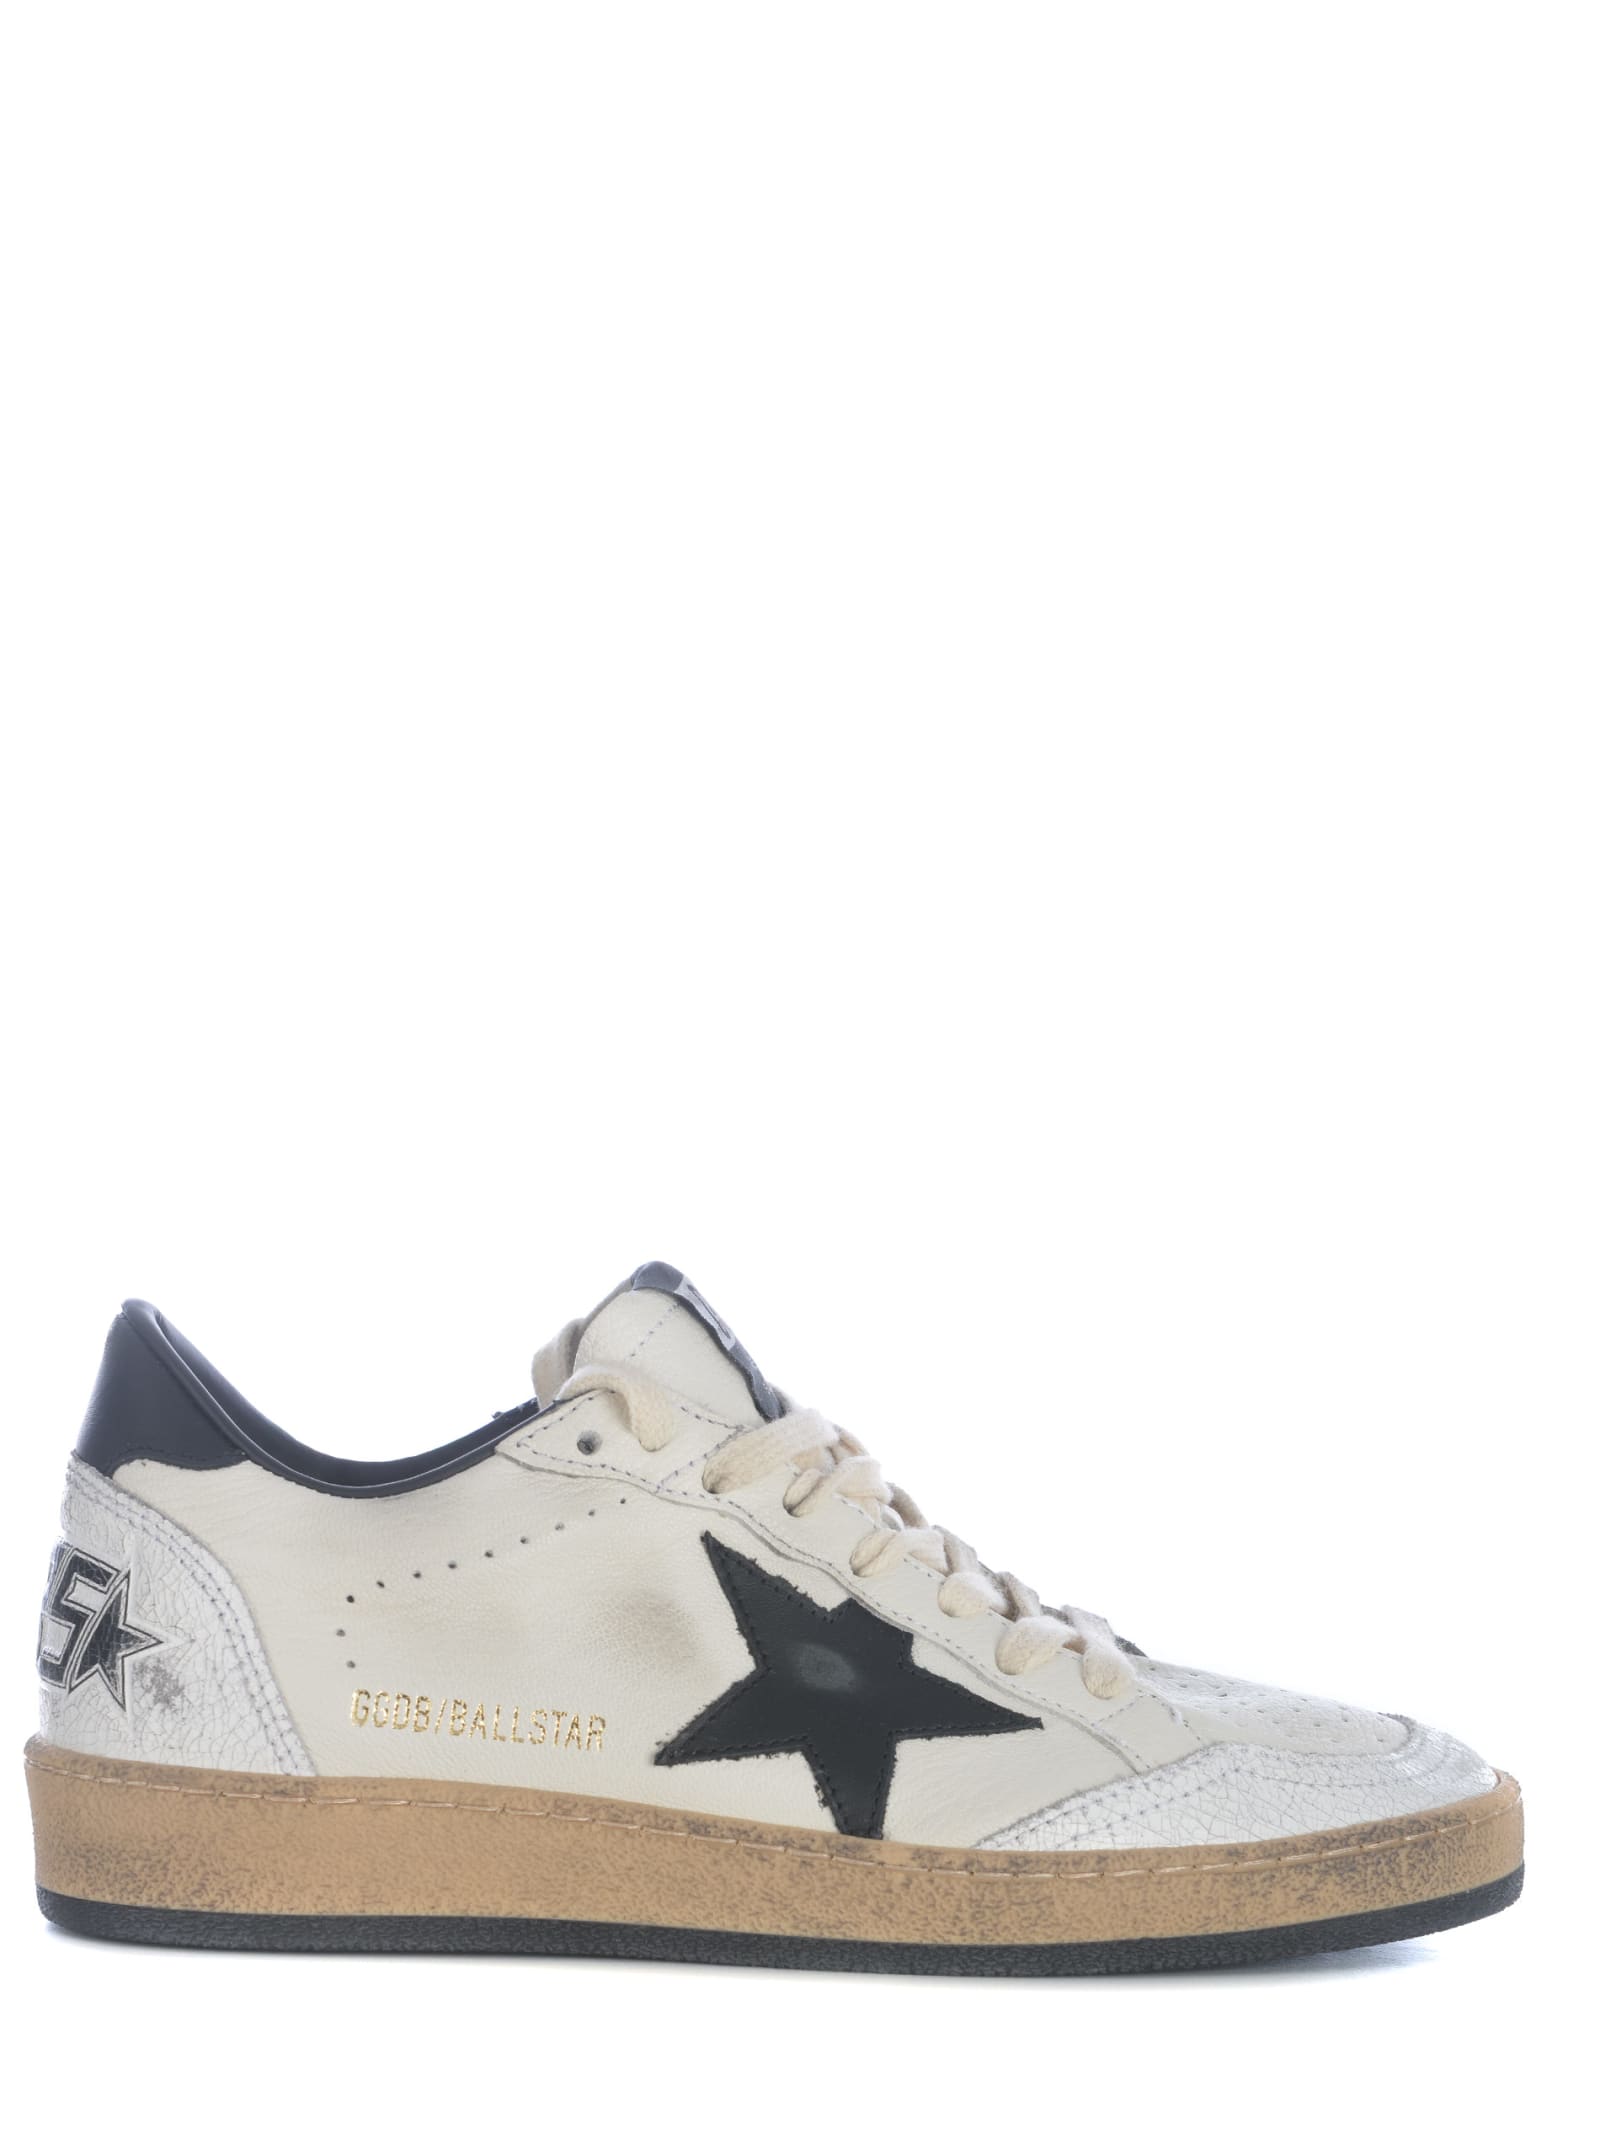 GOLDEN GOOSE SNEAKERS GOLDEN GOOSE BALL STAR MADE OF LEATHER